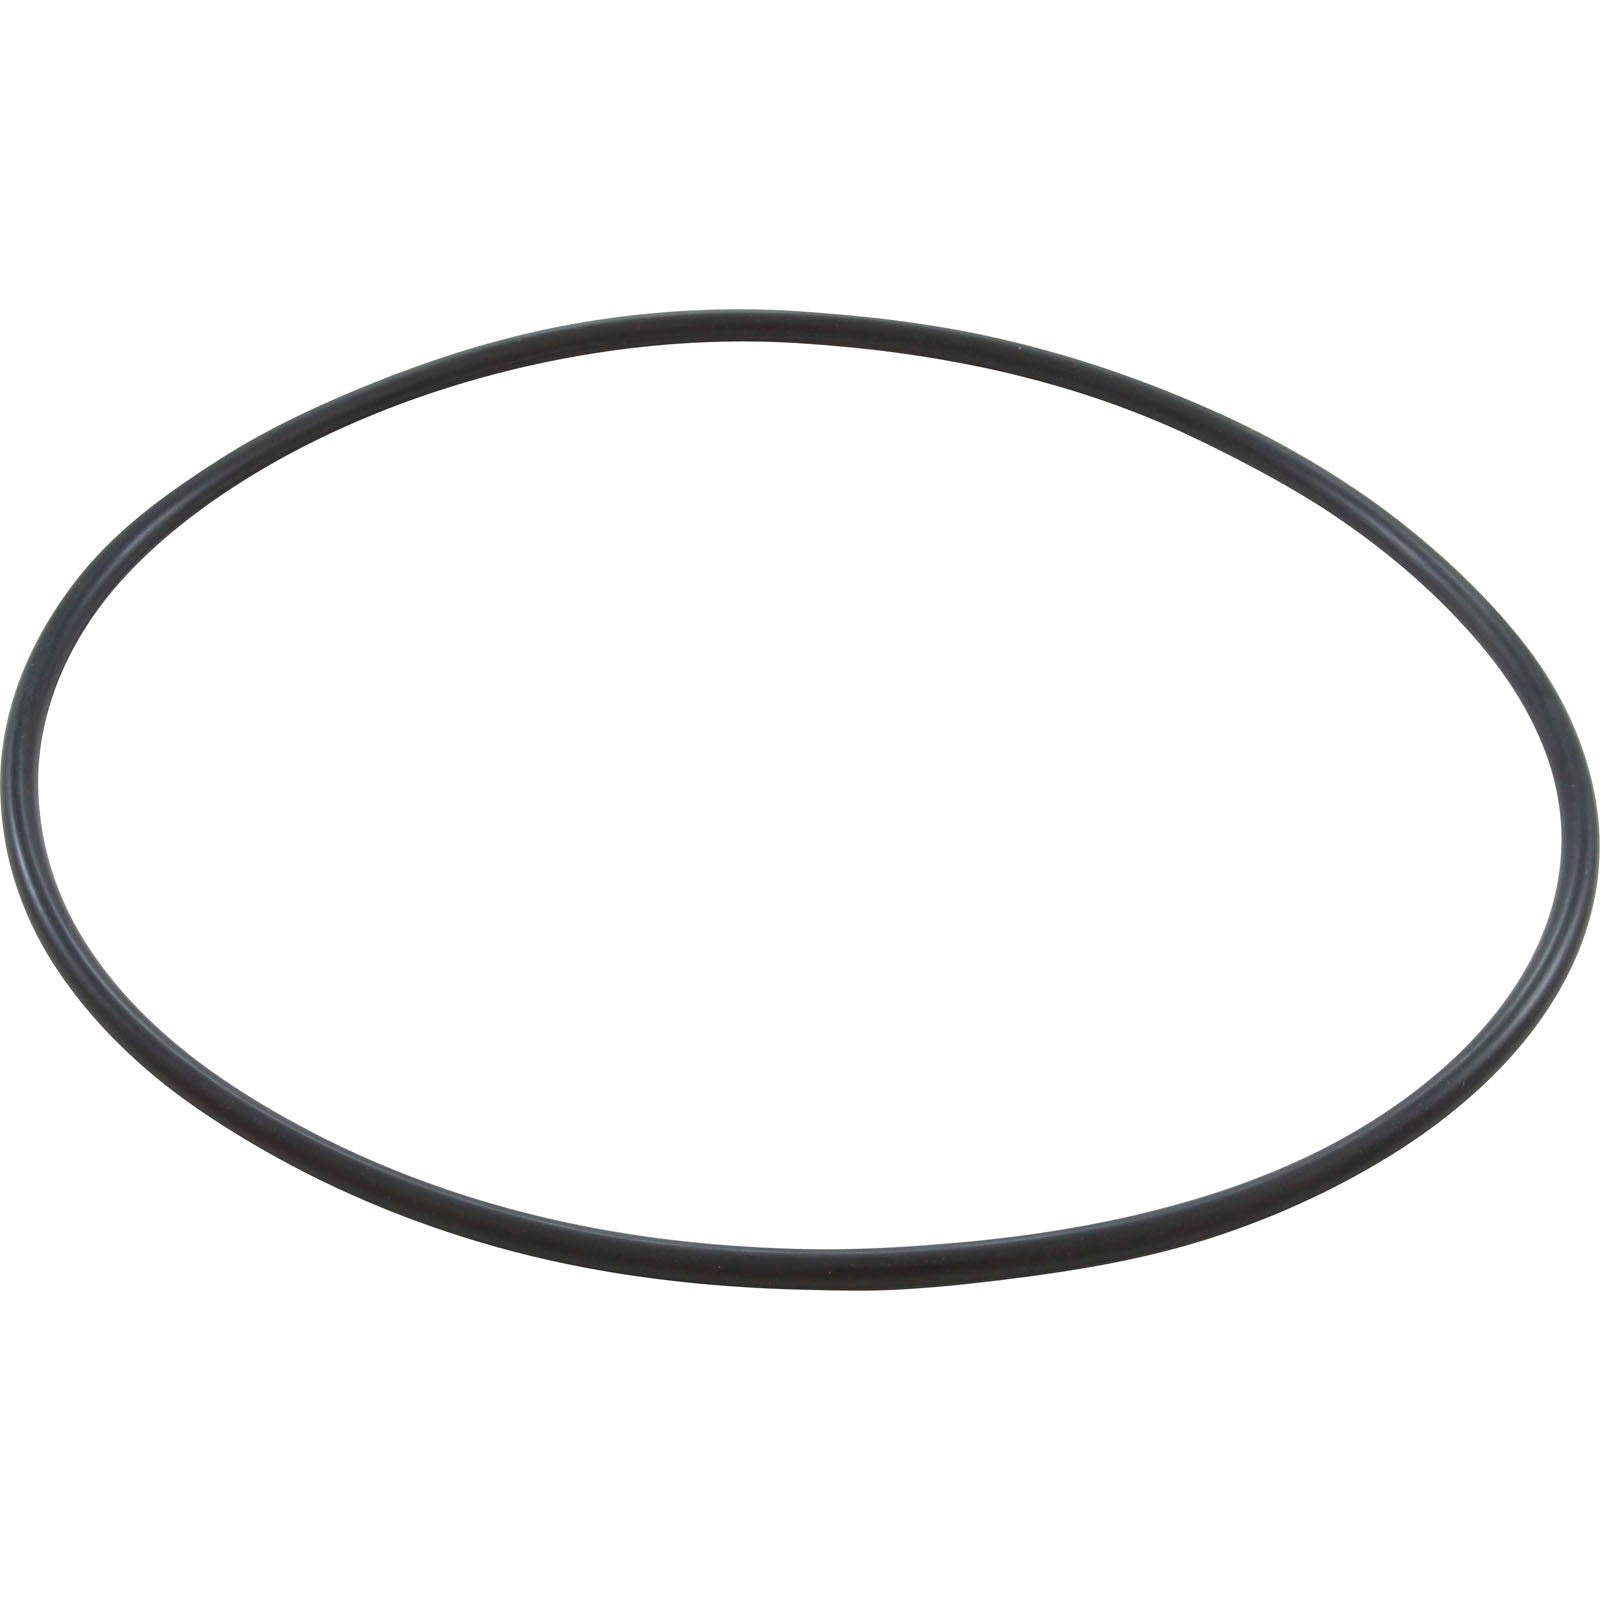 O-Ring, Speck 94, Seal Plate- 2921541226